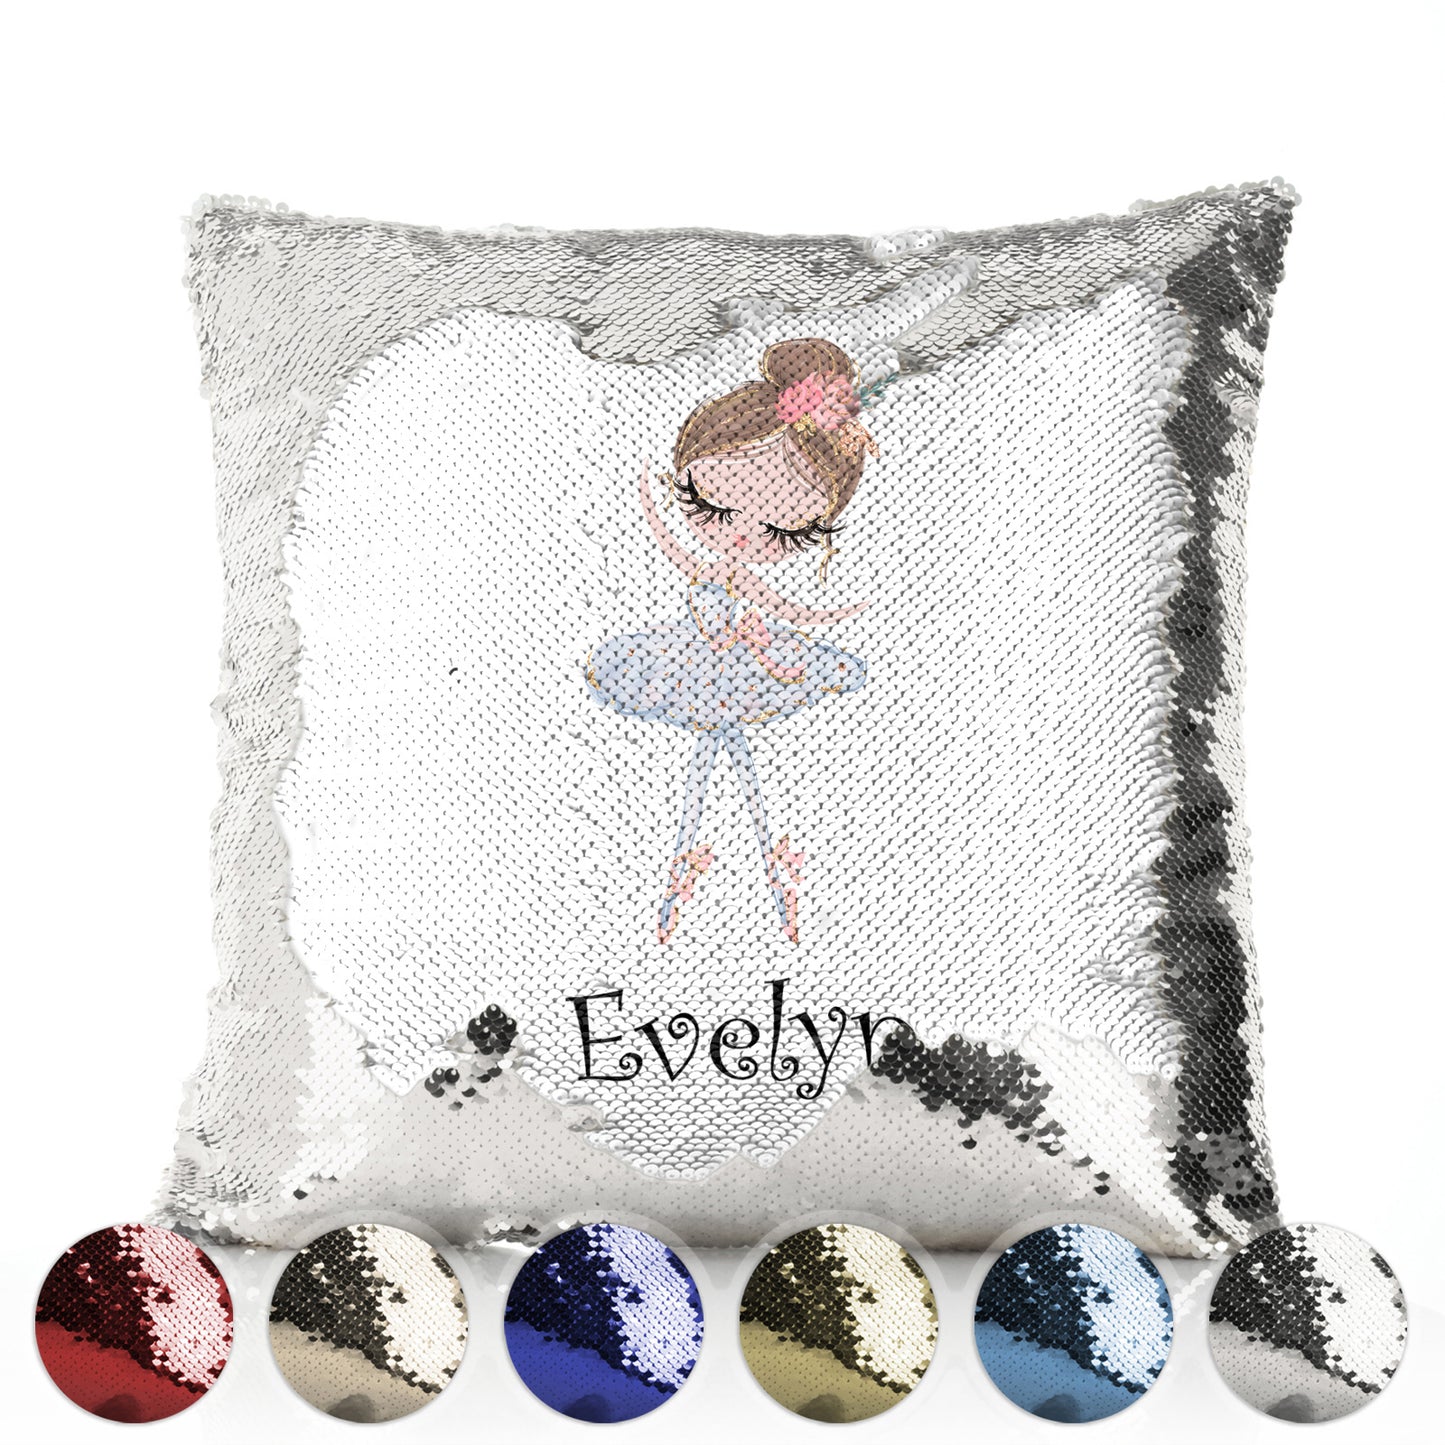 Personalised Sequin Cushion with Cute Text and Light Brown Hair White Dress Ballerina